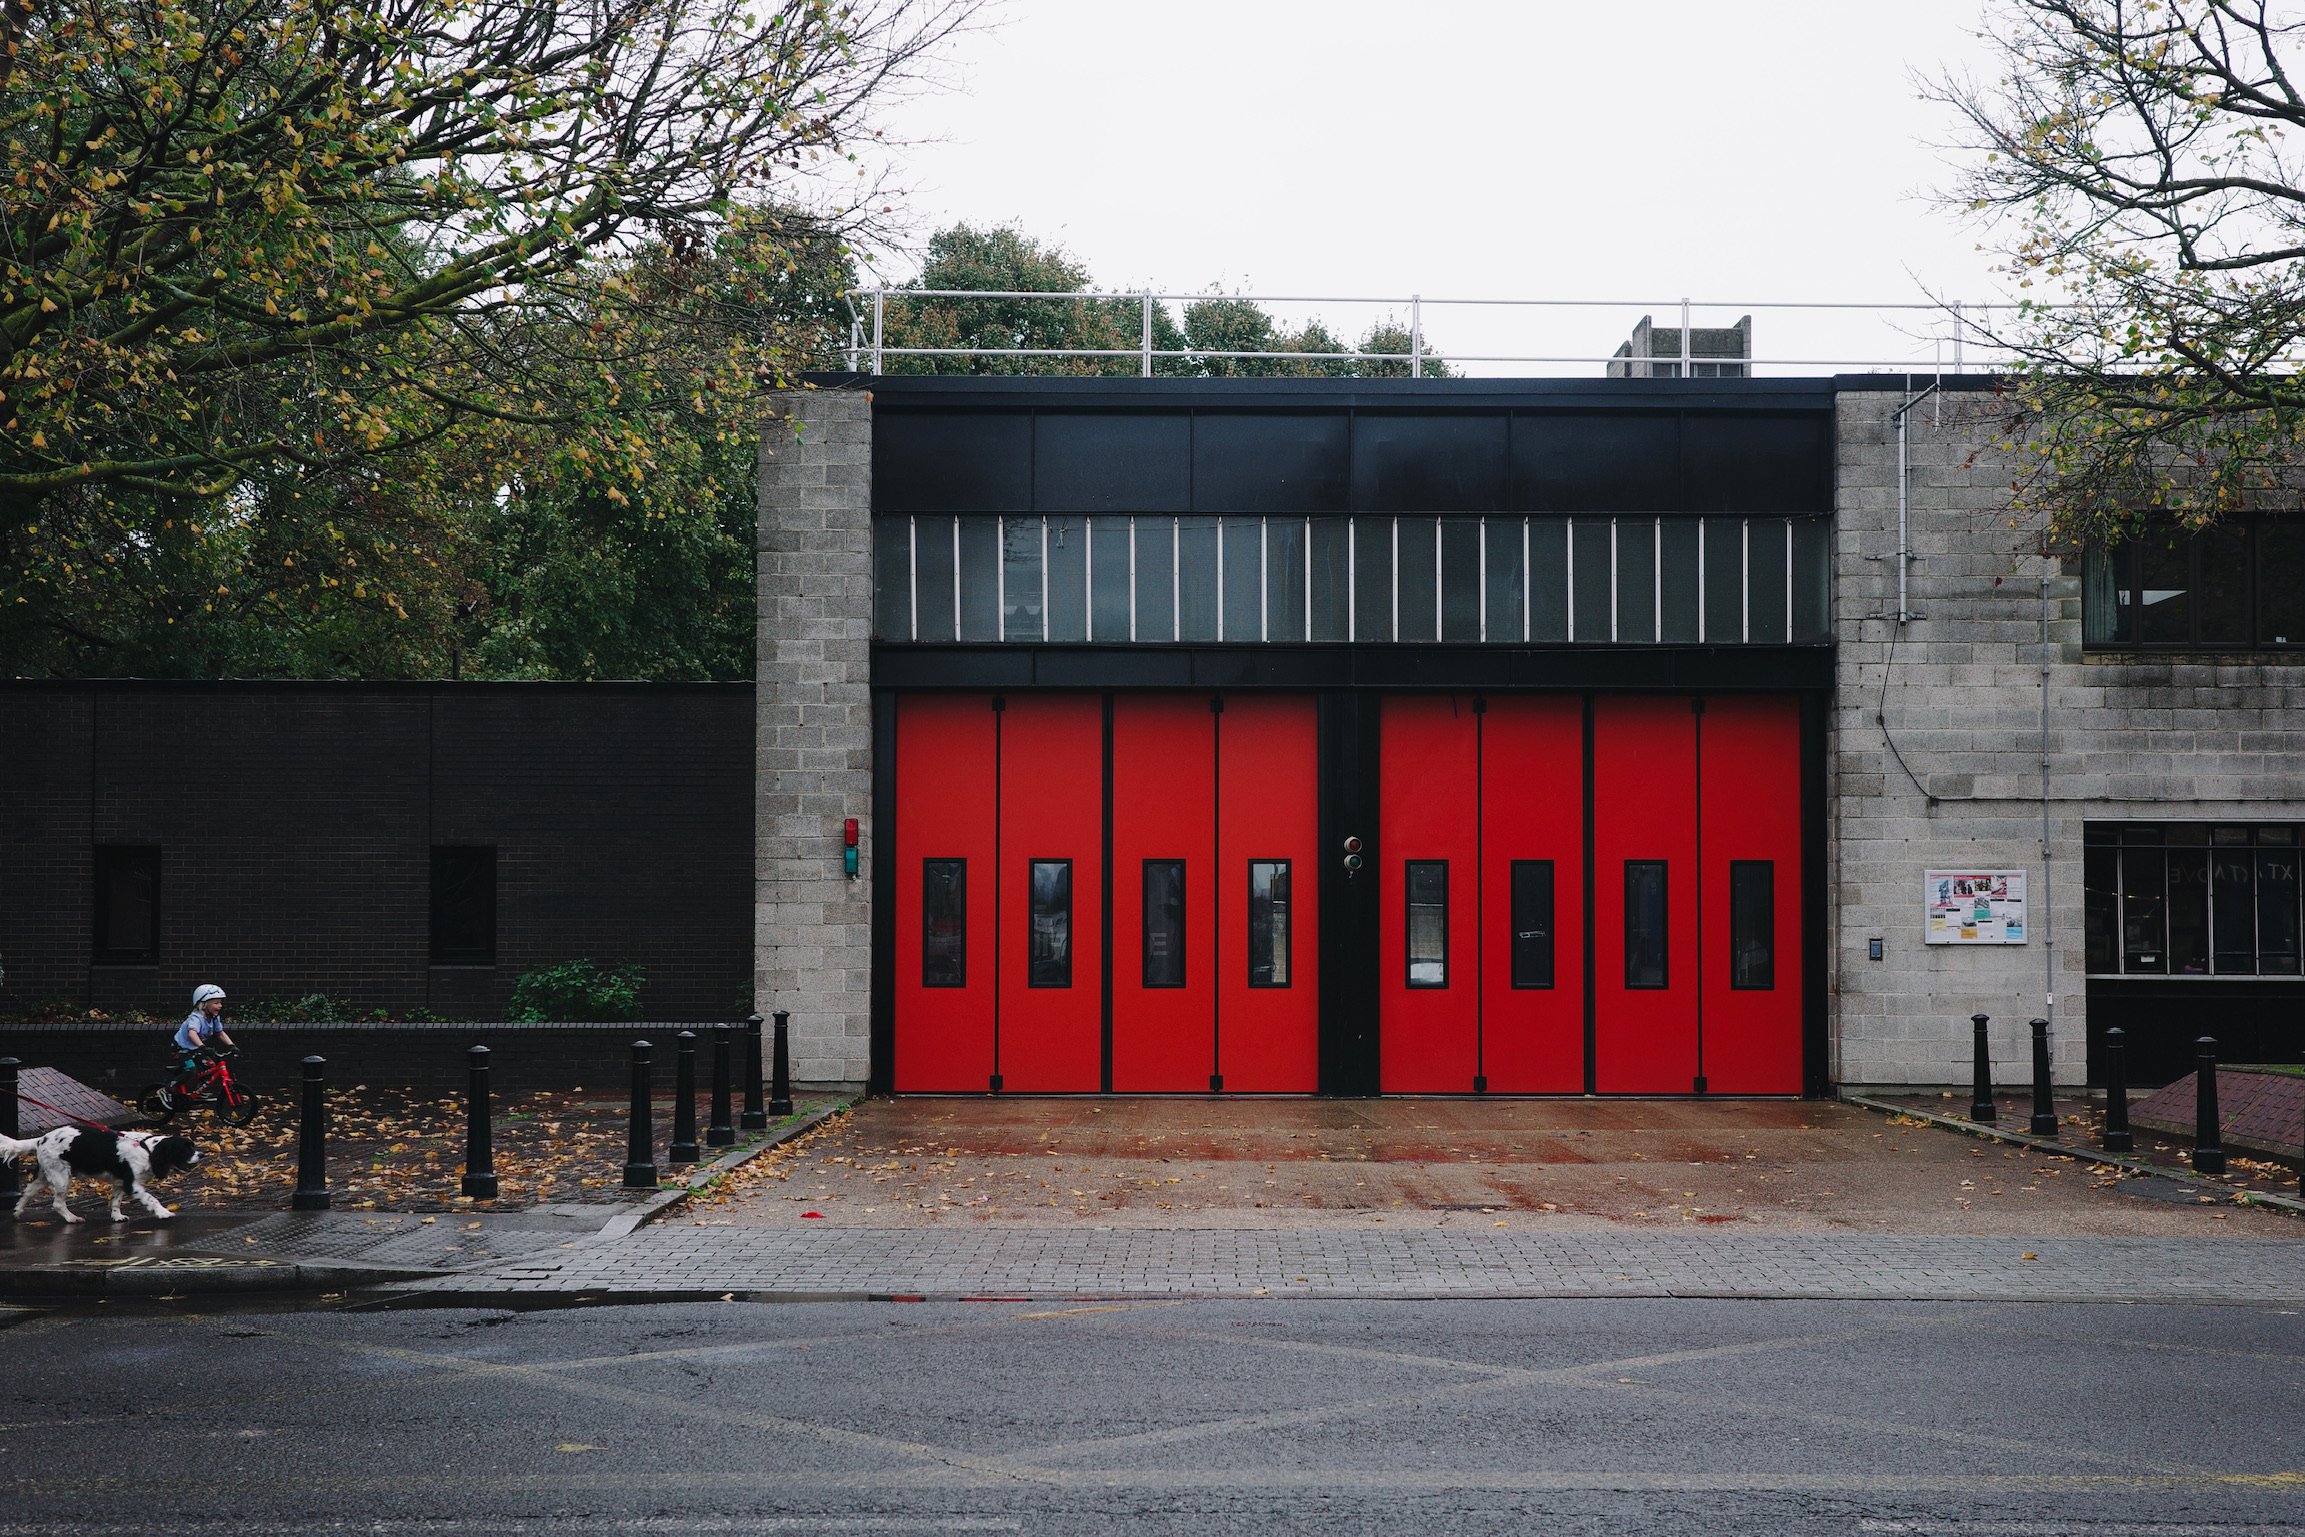 A brutalist fire station with read doors and exposed concrete. A dog and a child appears on the edge of the photo.